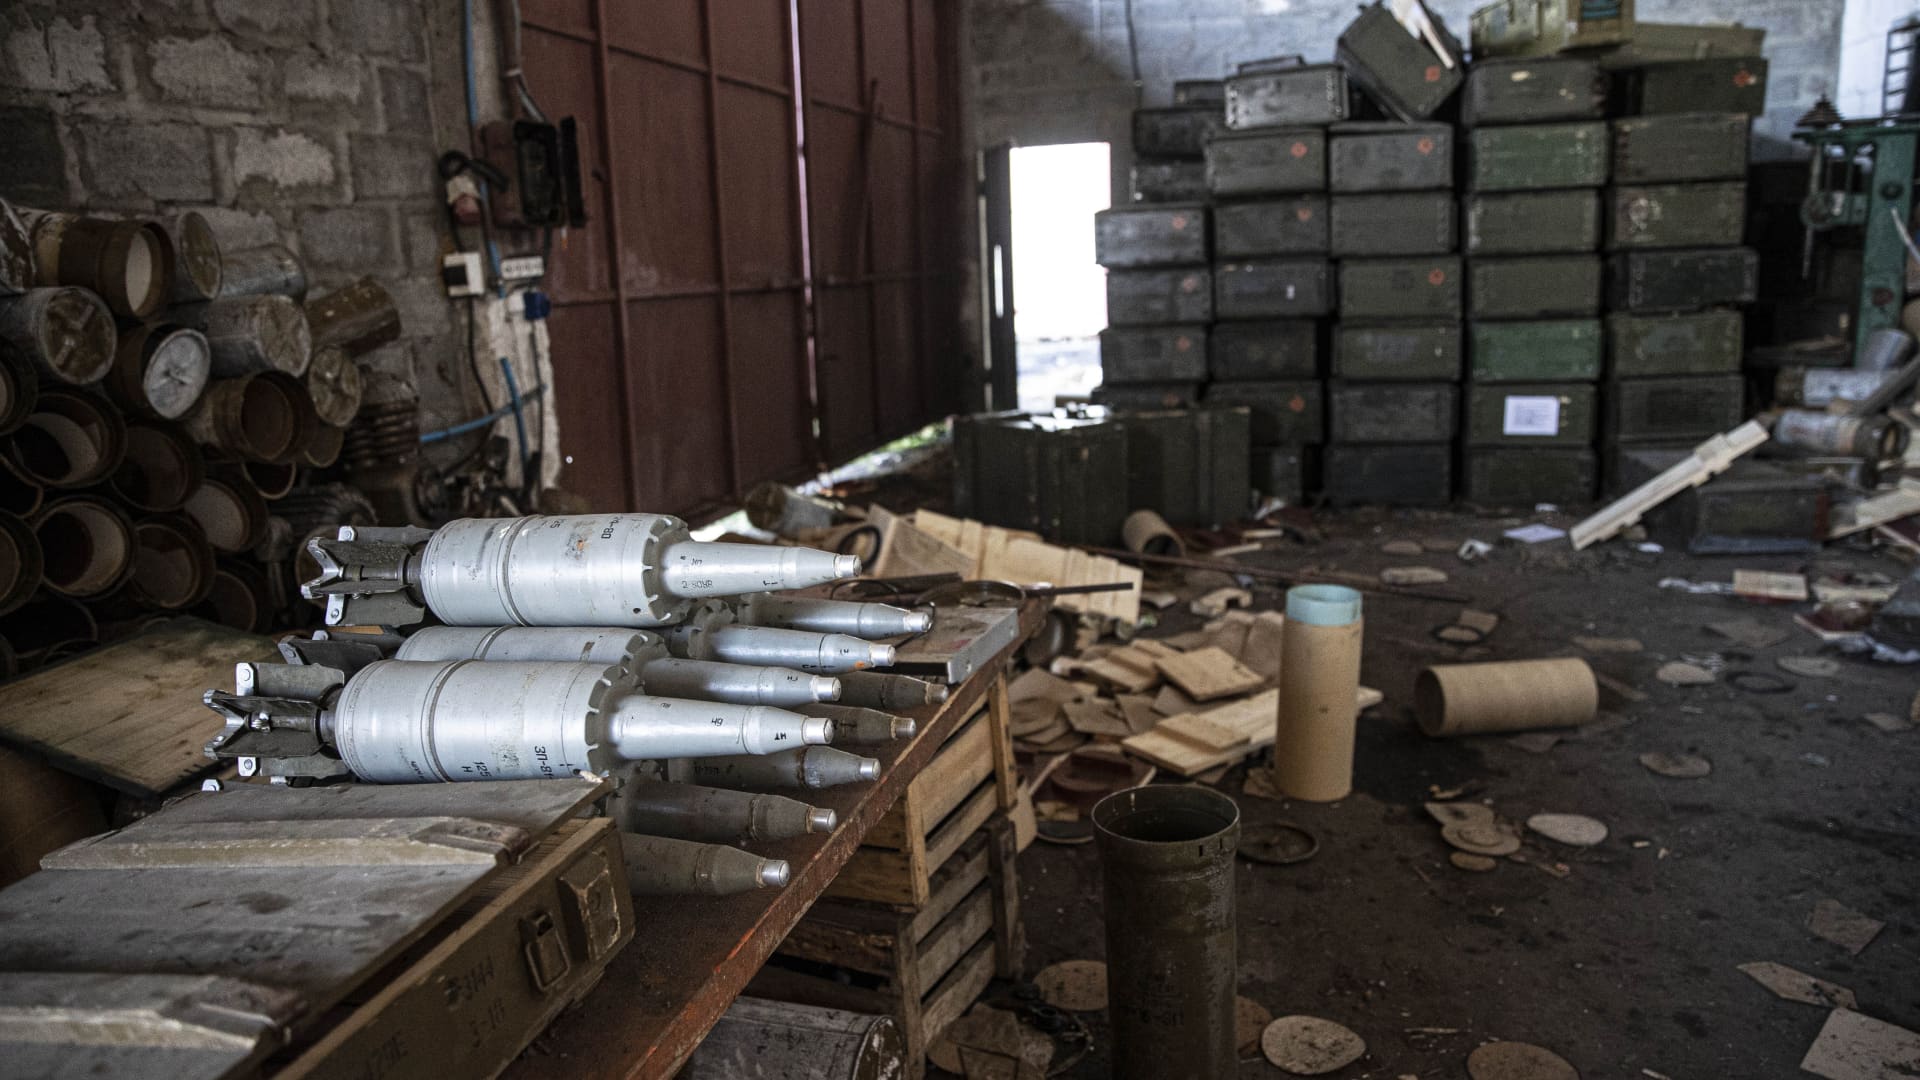  Ukrainian forces found a large amount of ammunition belonging to the Russian forces during their searches in the village. (Photo by Metin Aktas/Anadolu Agency via Getty Images)